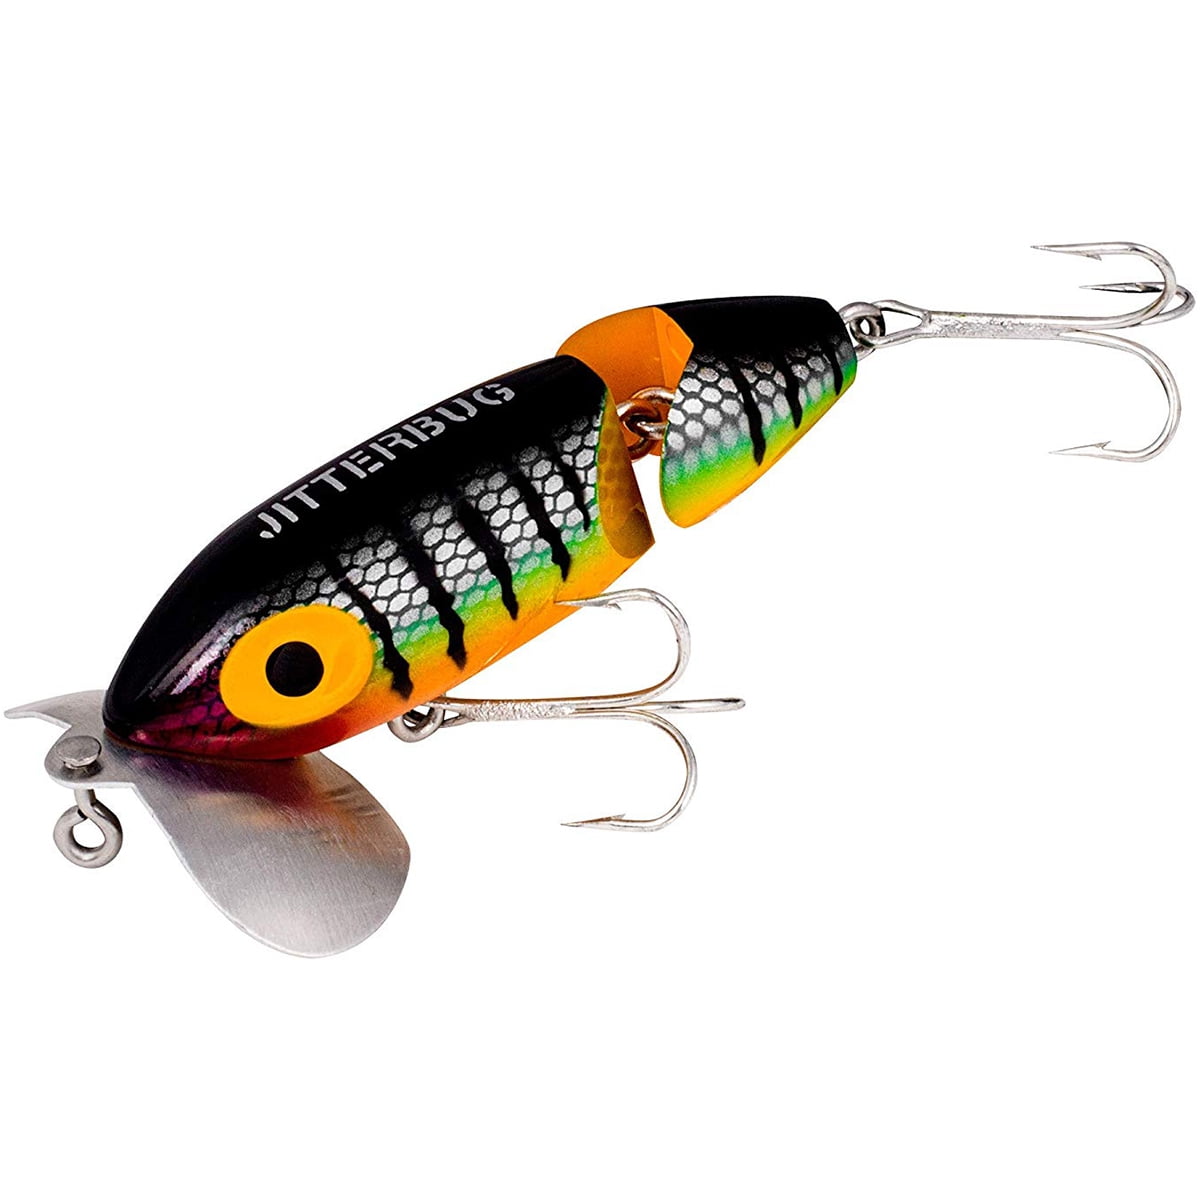 Arbogast Jointed Jitterbug 5/8 Oz Fishing Lure - Frog/white Belly